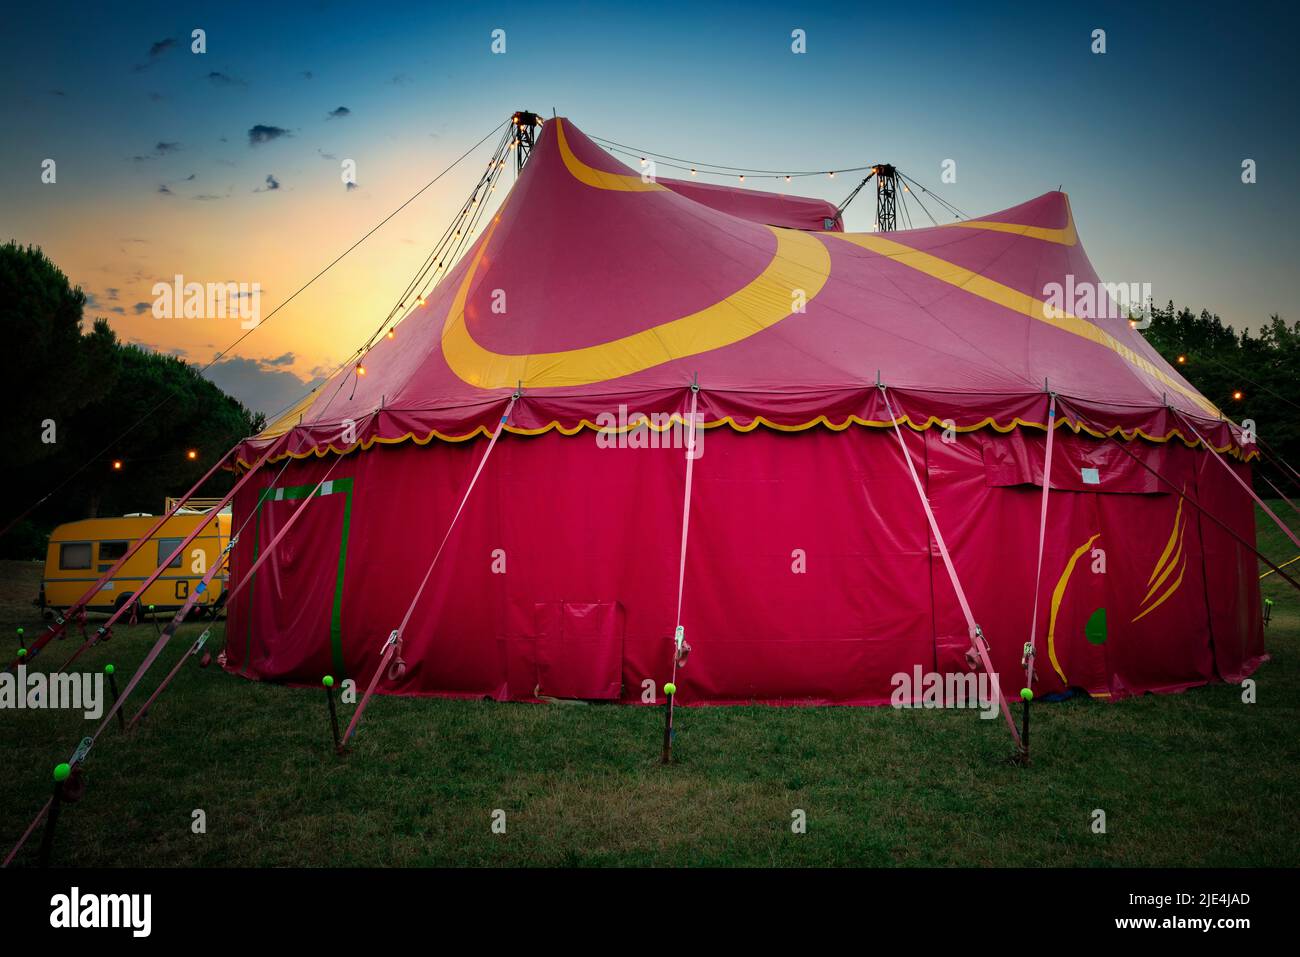 Dawn over a red an yellow circus tent mounted on a city park. Stock Photo